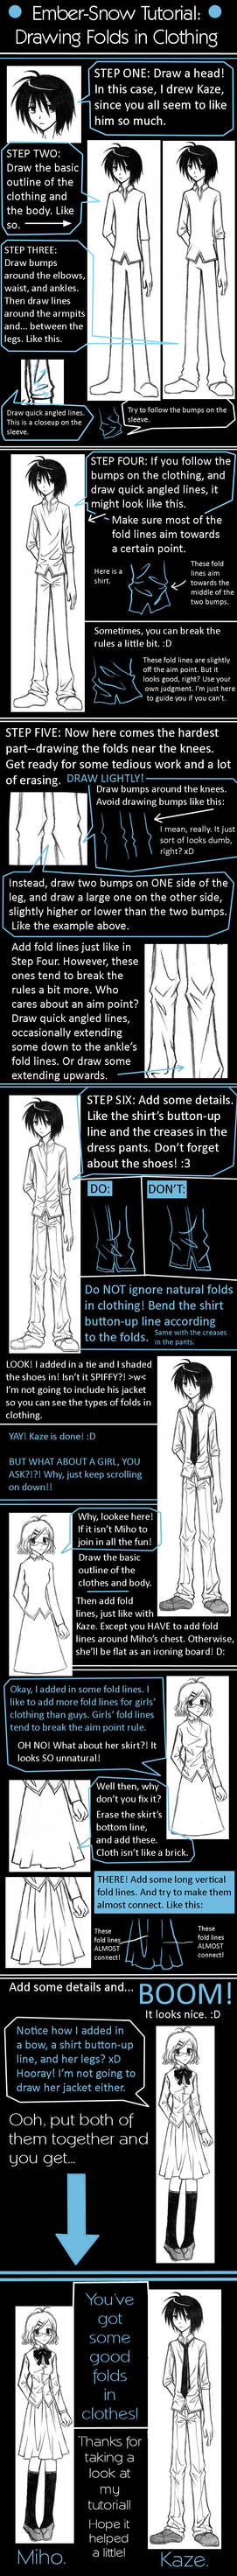 TUTORIAL: Folds in Clothing